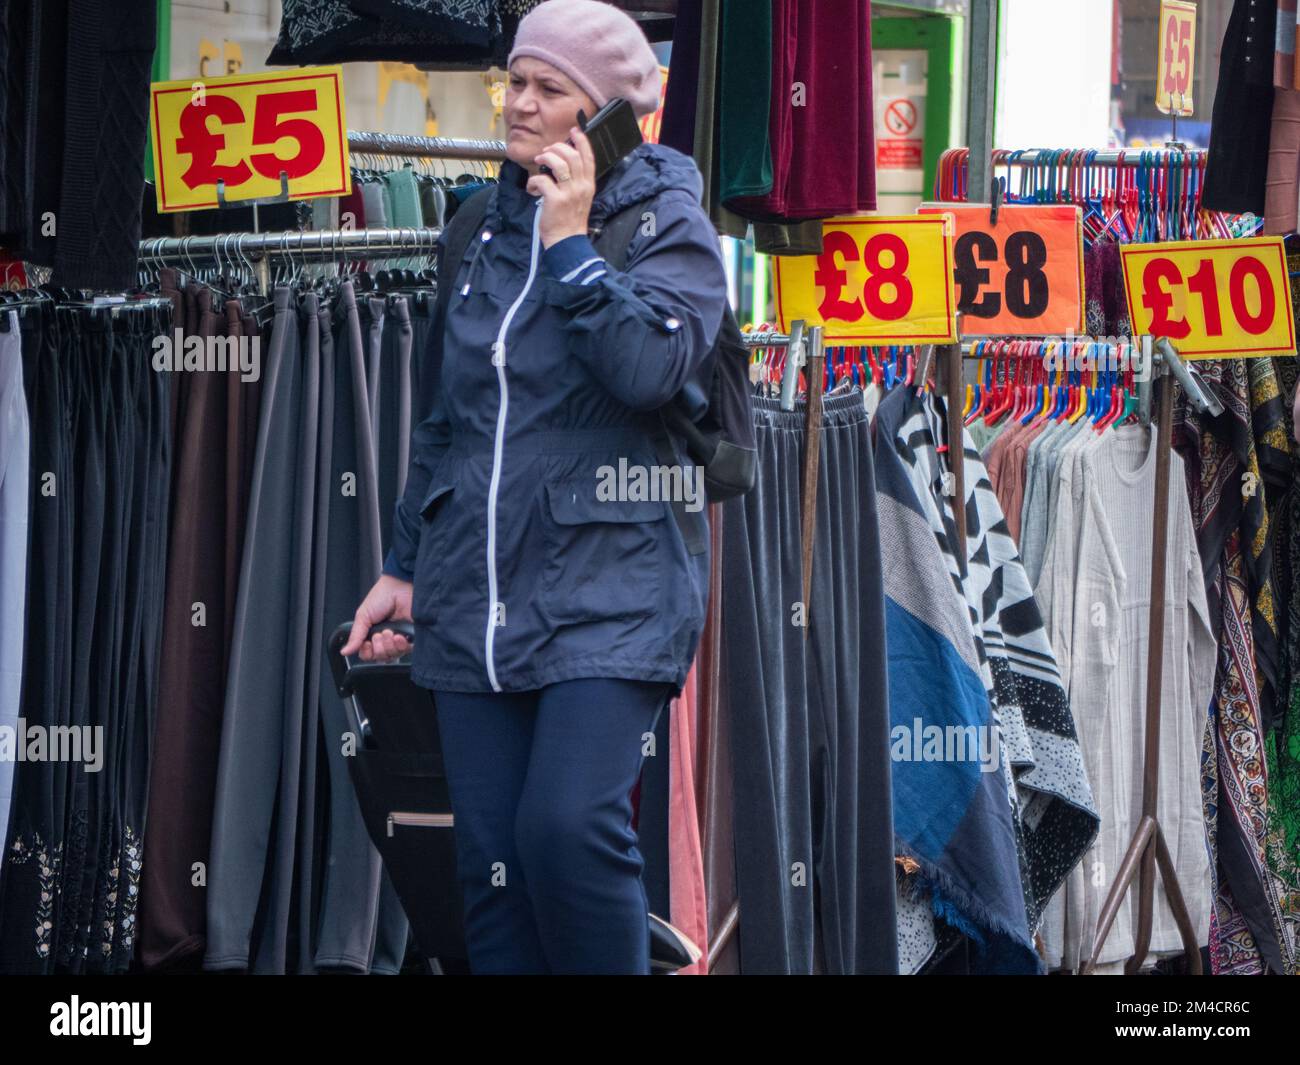 Shopper walks past goods in Walthamstow market, London, UK, the longest outdoor market in Europe. Traders and market stall holders serve shoppers, with prices displayed in pounds Stock Photo